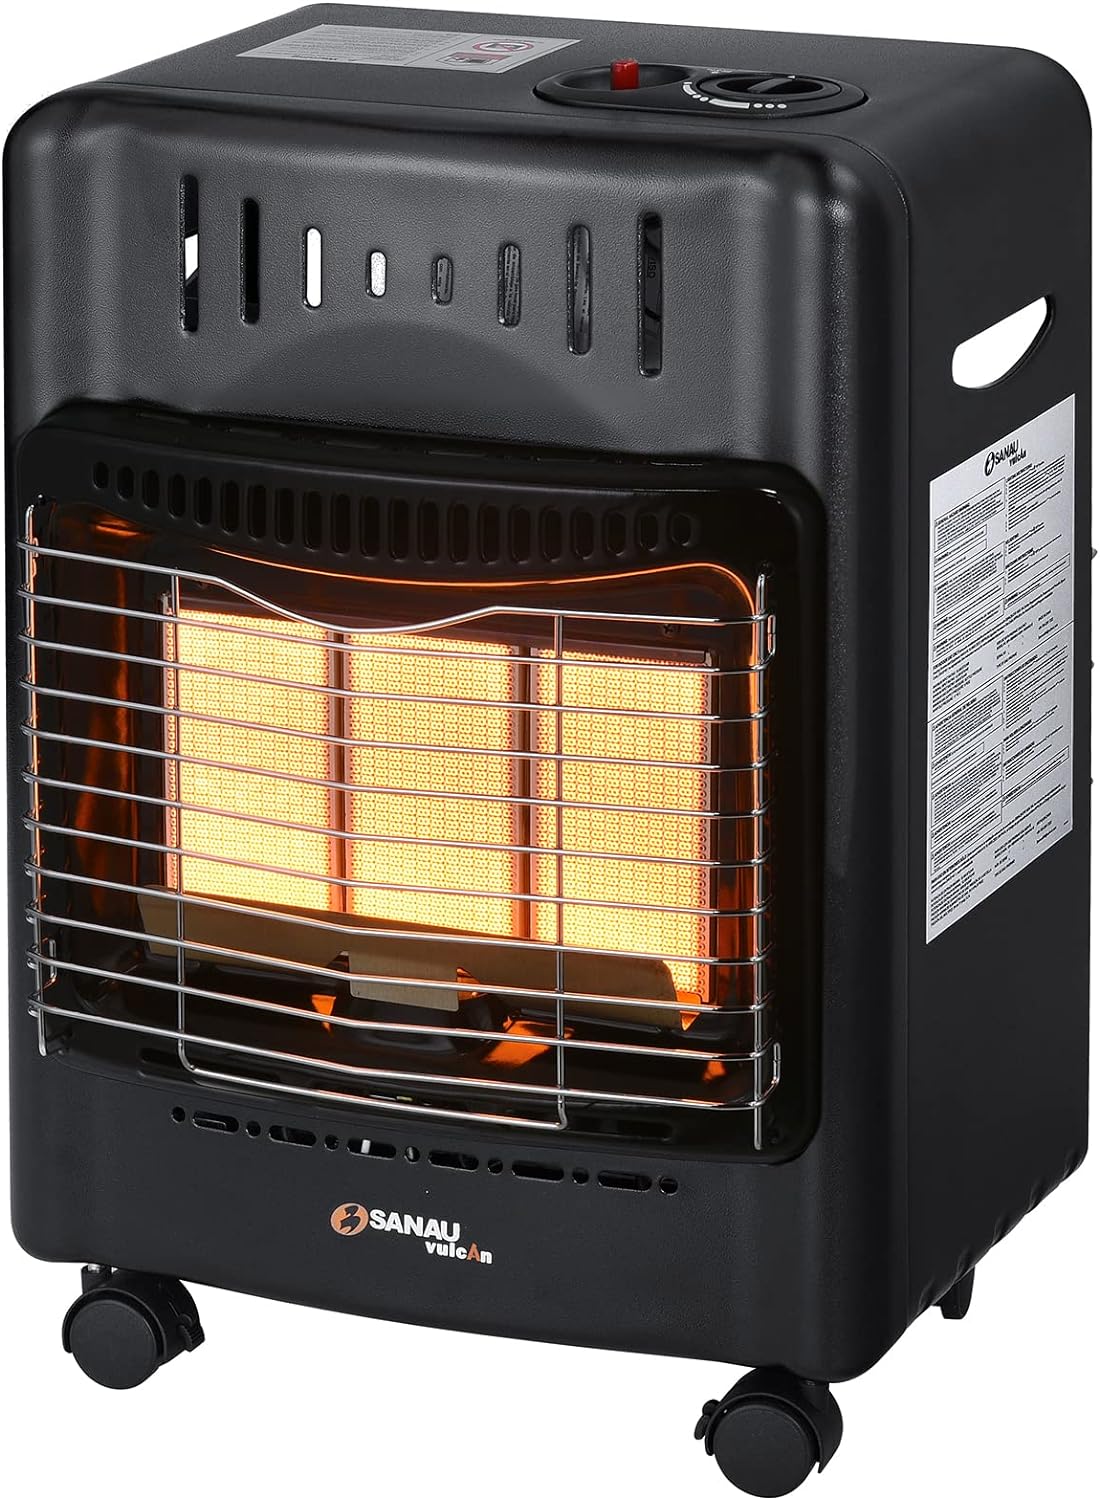 SANAUVULCAN Propane Heater, 18,000 BTU Portable Radiant Heater for Garages, Construction sites and yards,Quiet Propane Radiant Heater with Gas Regulator and Hose, Heating Area Up to 450 sq. Ft(Black) - SANAUVULCAN Propane Heater Review